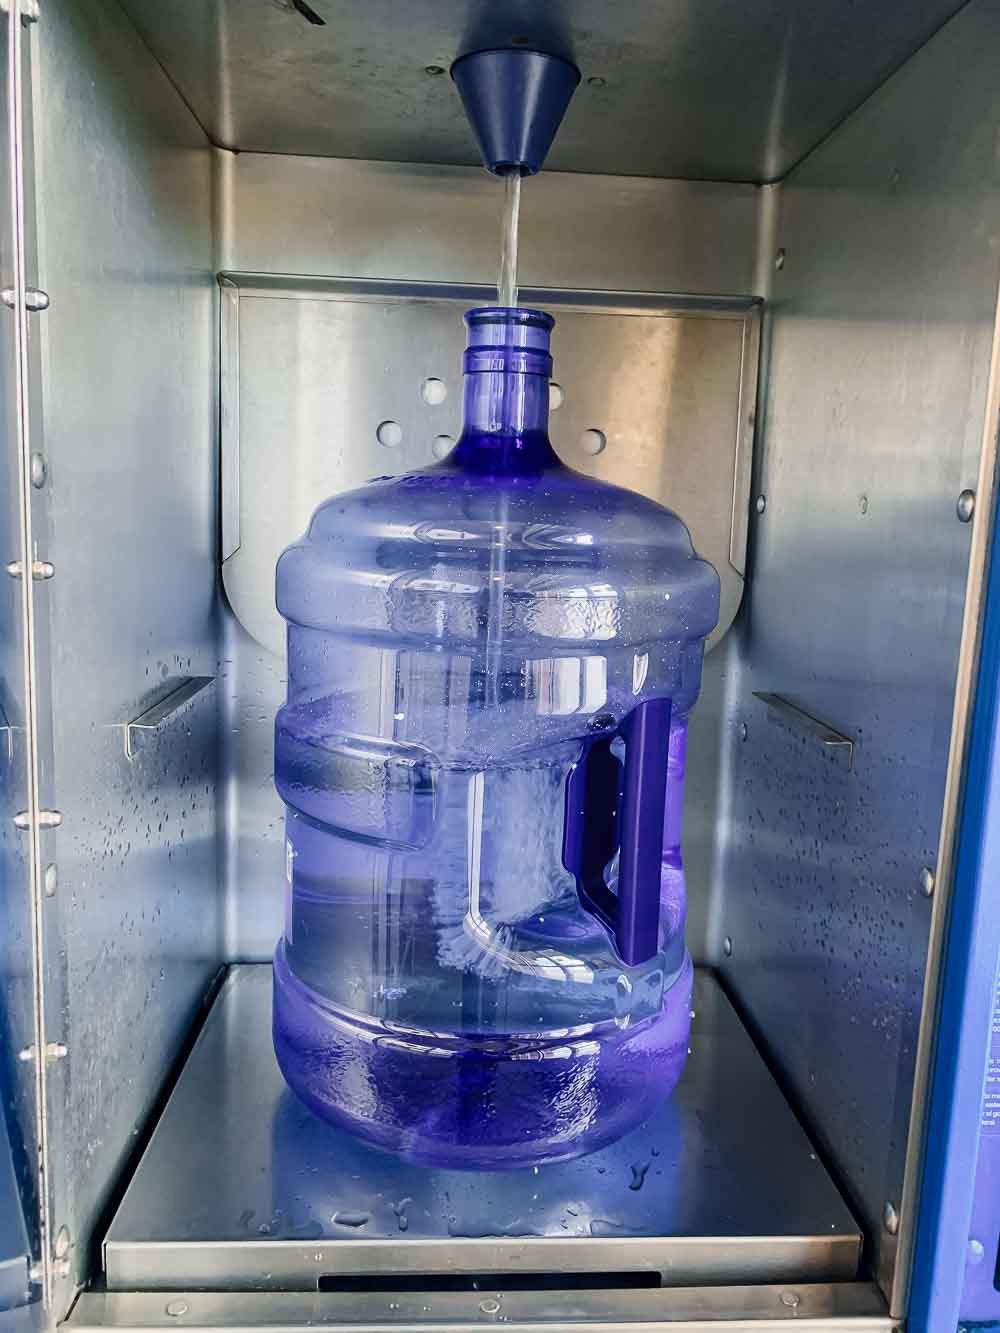 How a Primo Water Dispenser Reduced our Kitchen's Plastic Waste